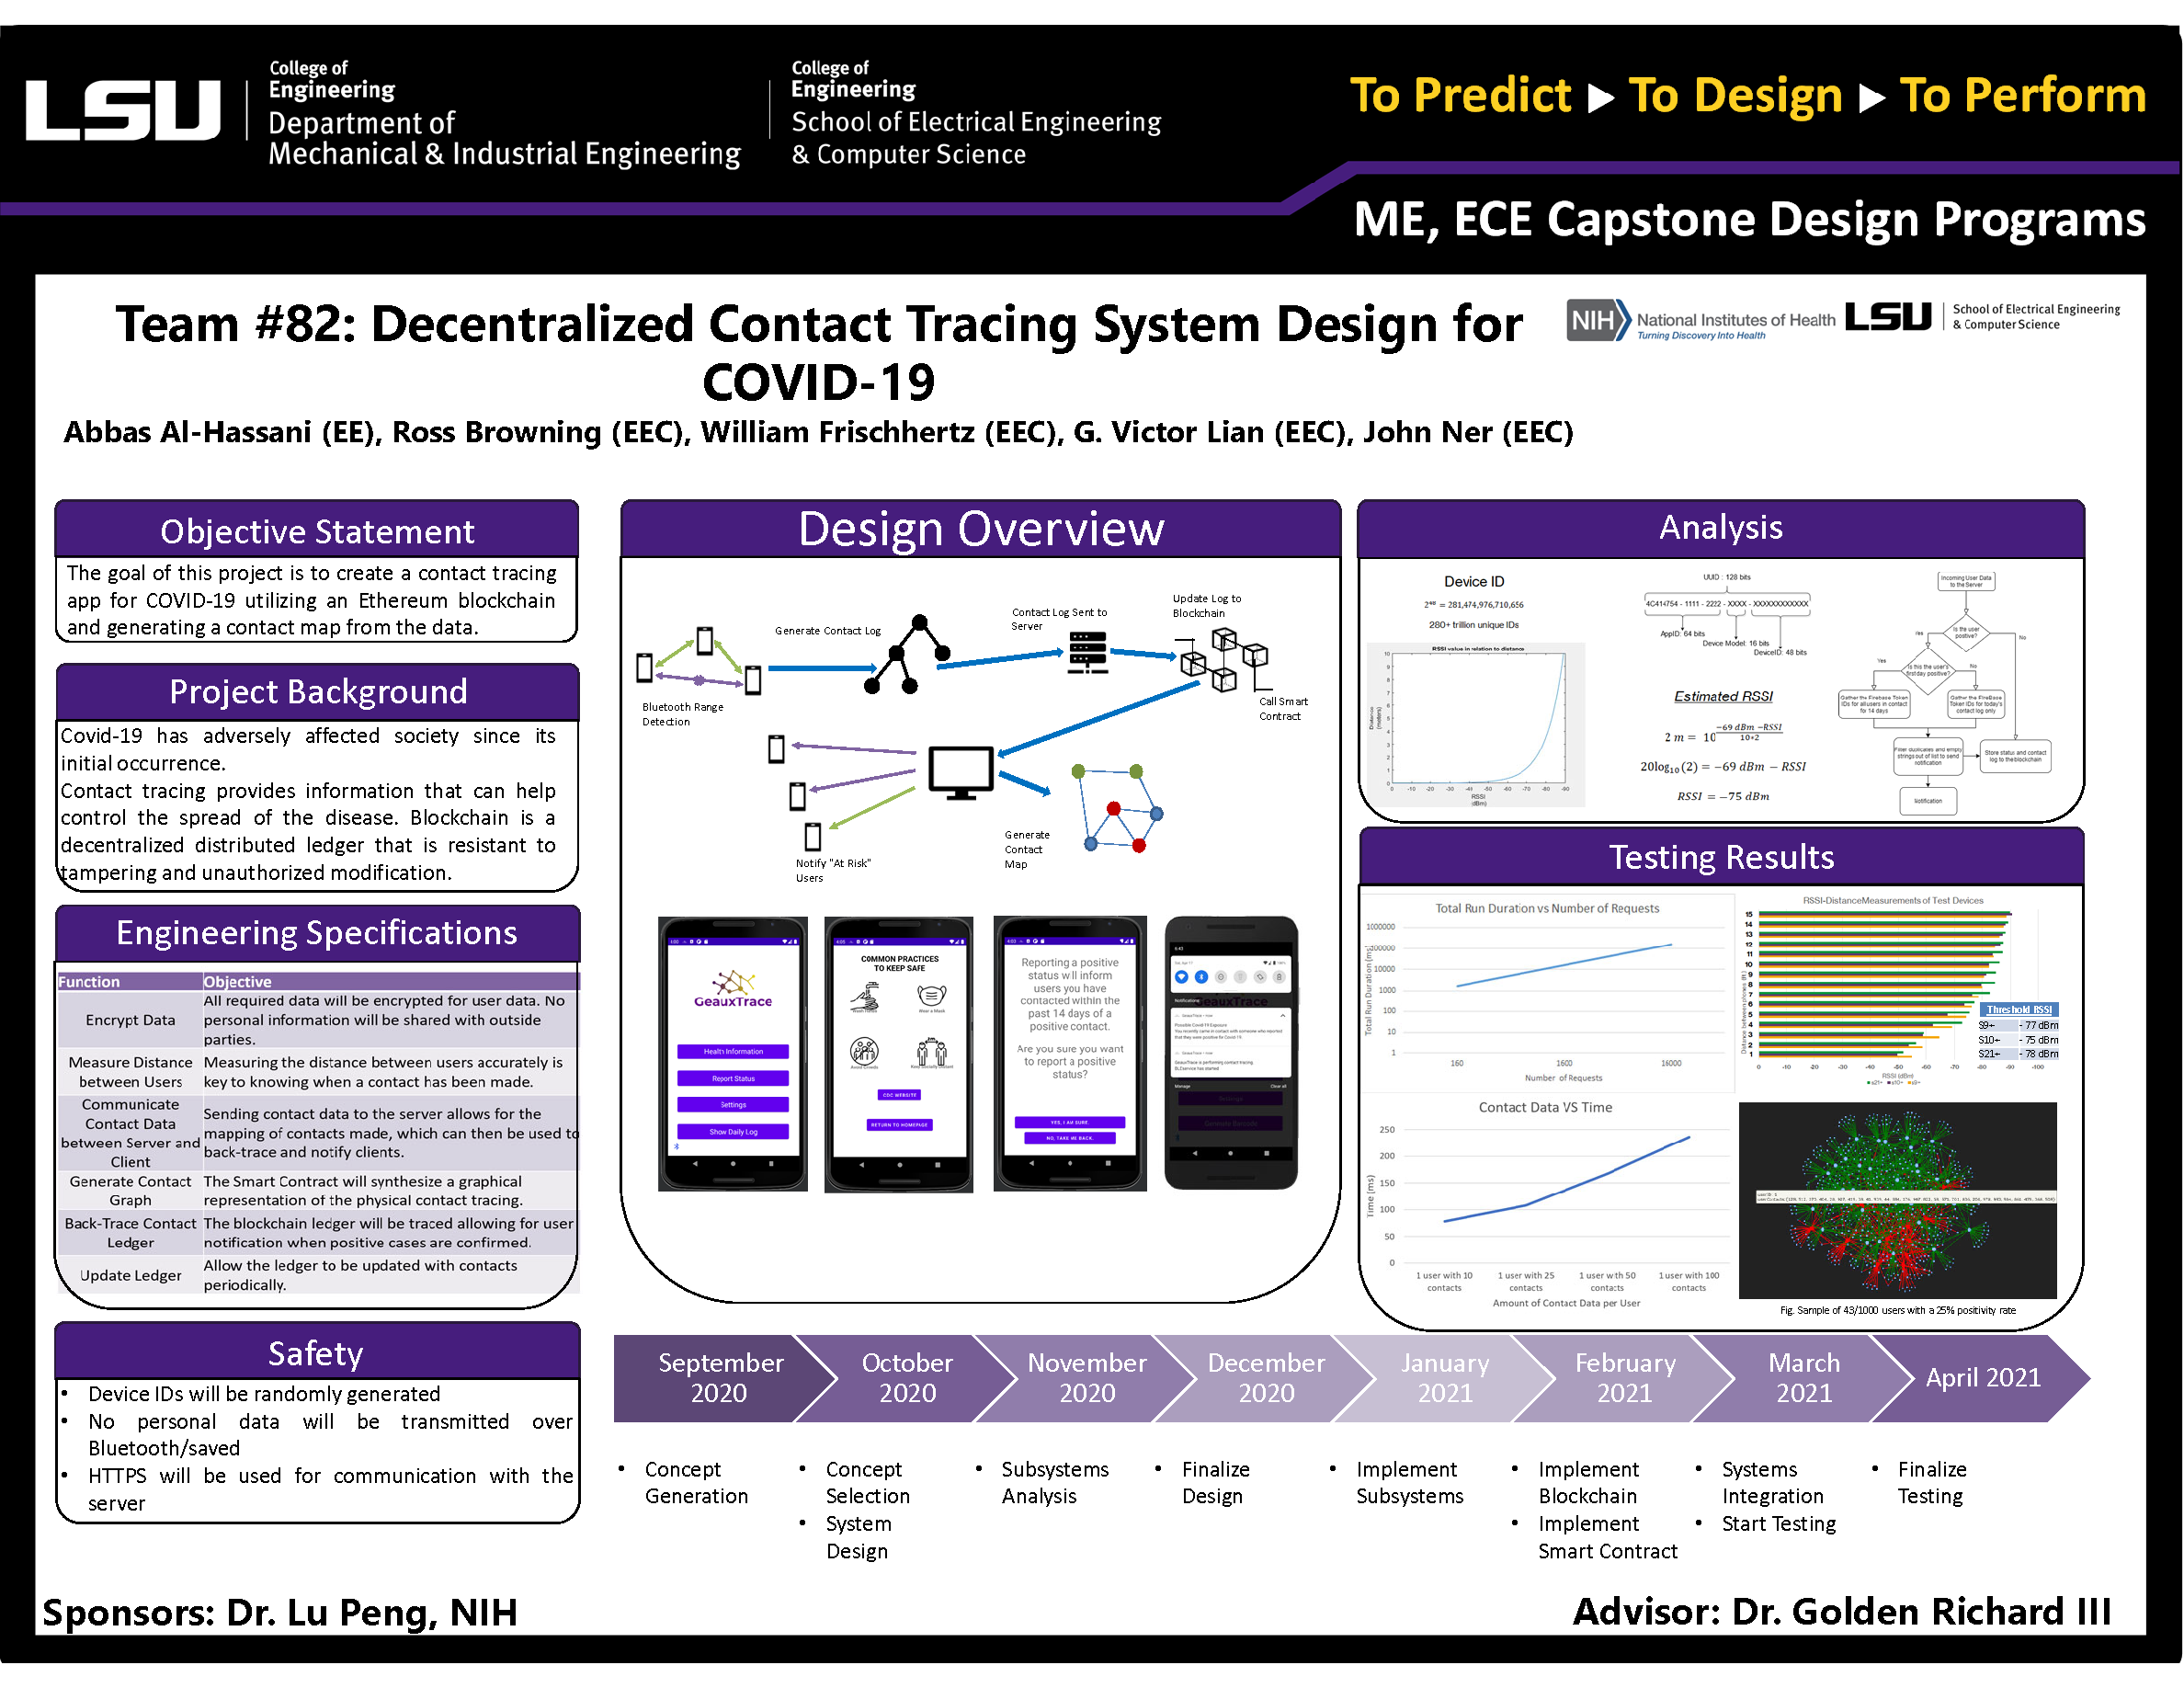 Project 82: Decentralized Contact Tracing System Design for COVID-19 (2021)